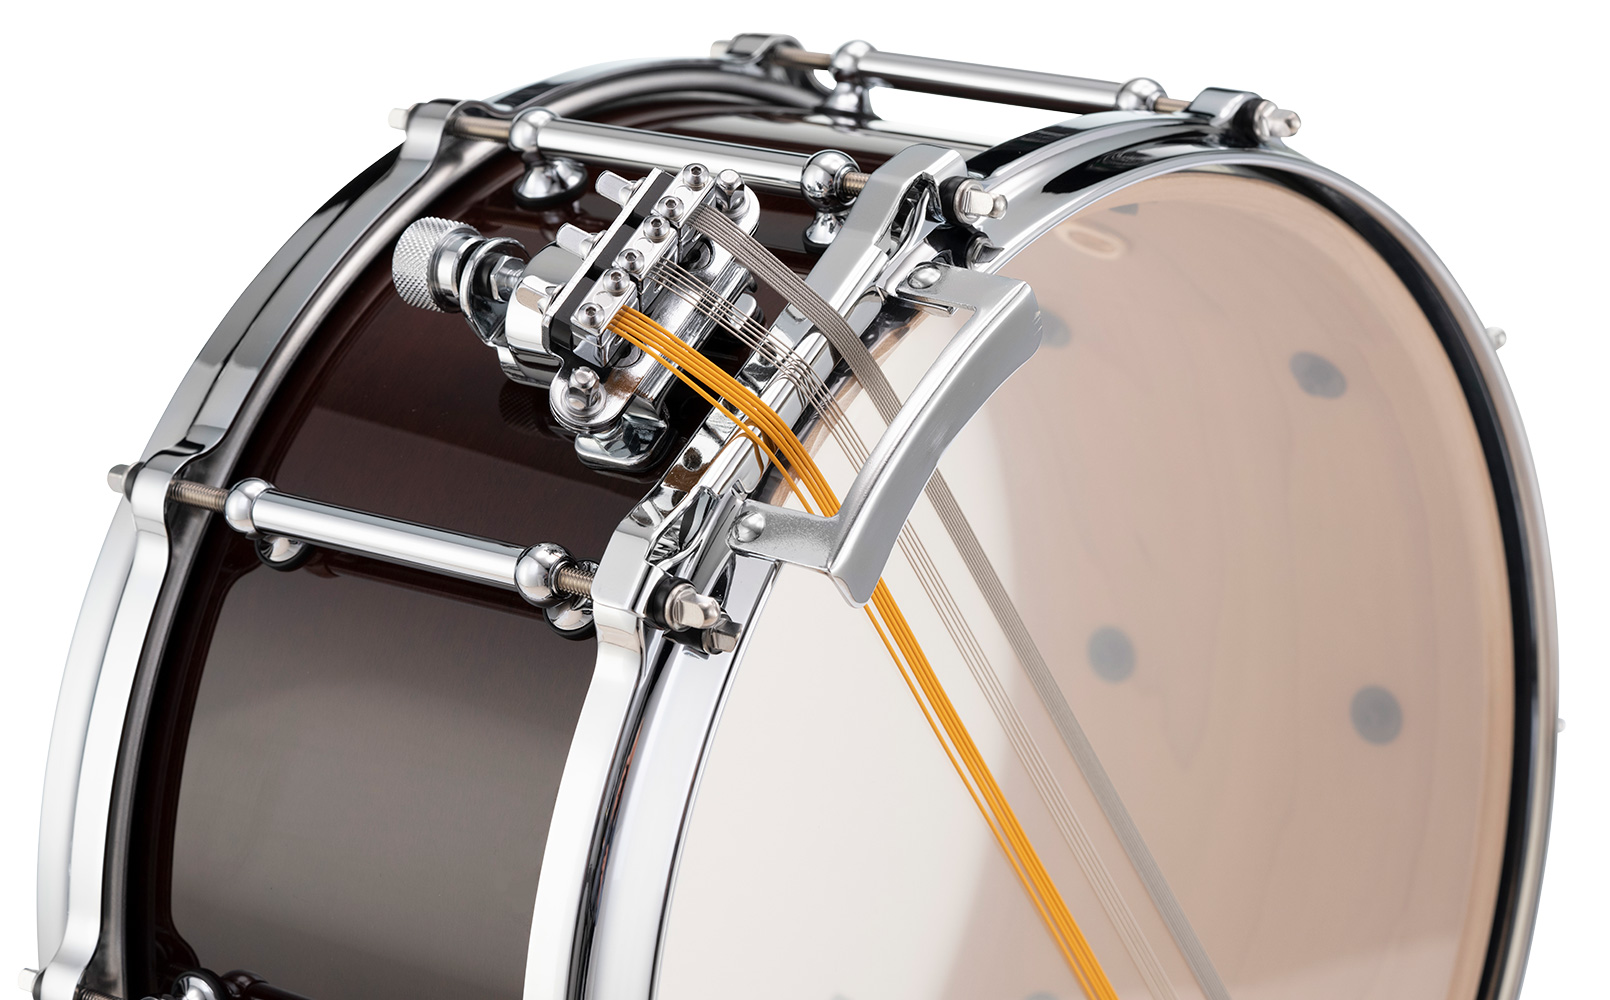 805-500_PHM1465-Philharmonic-Series-1-ply-Solid-Maple-Snare-Drum-204-High-Gloss-Walnut-Bordeaux(4).jpg